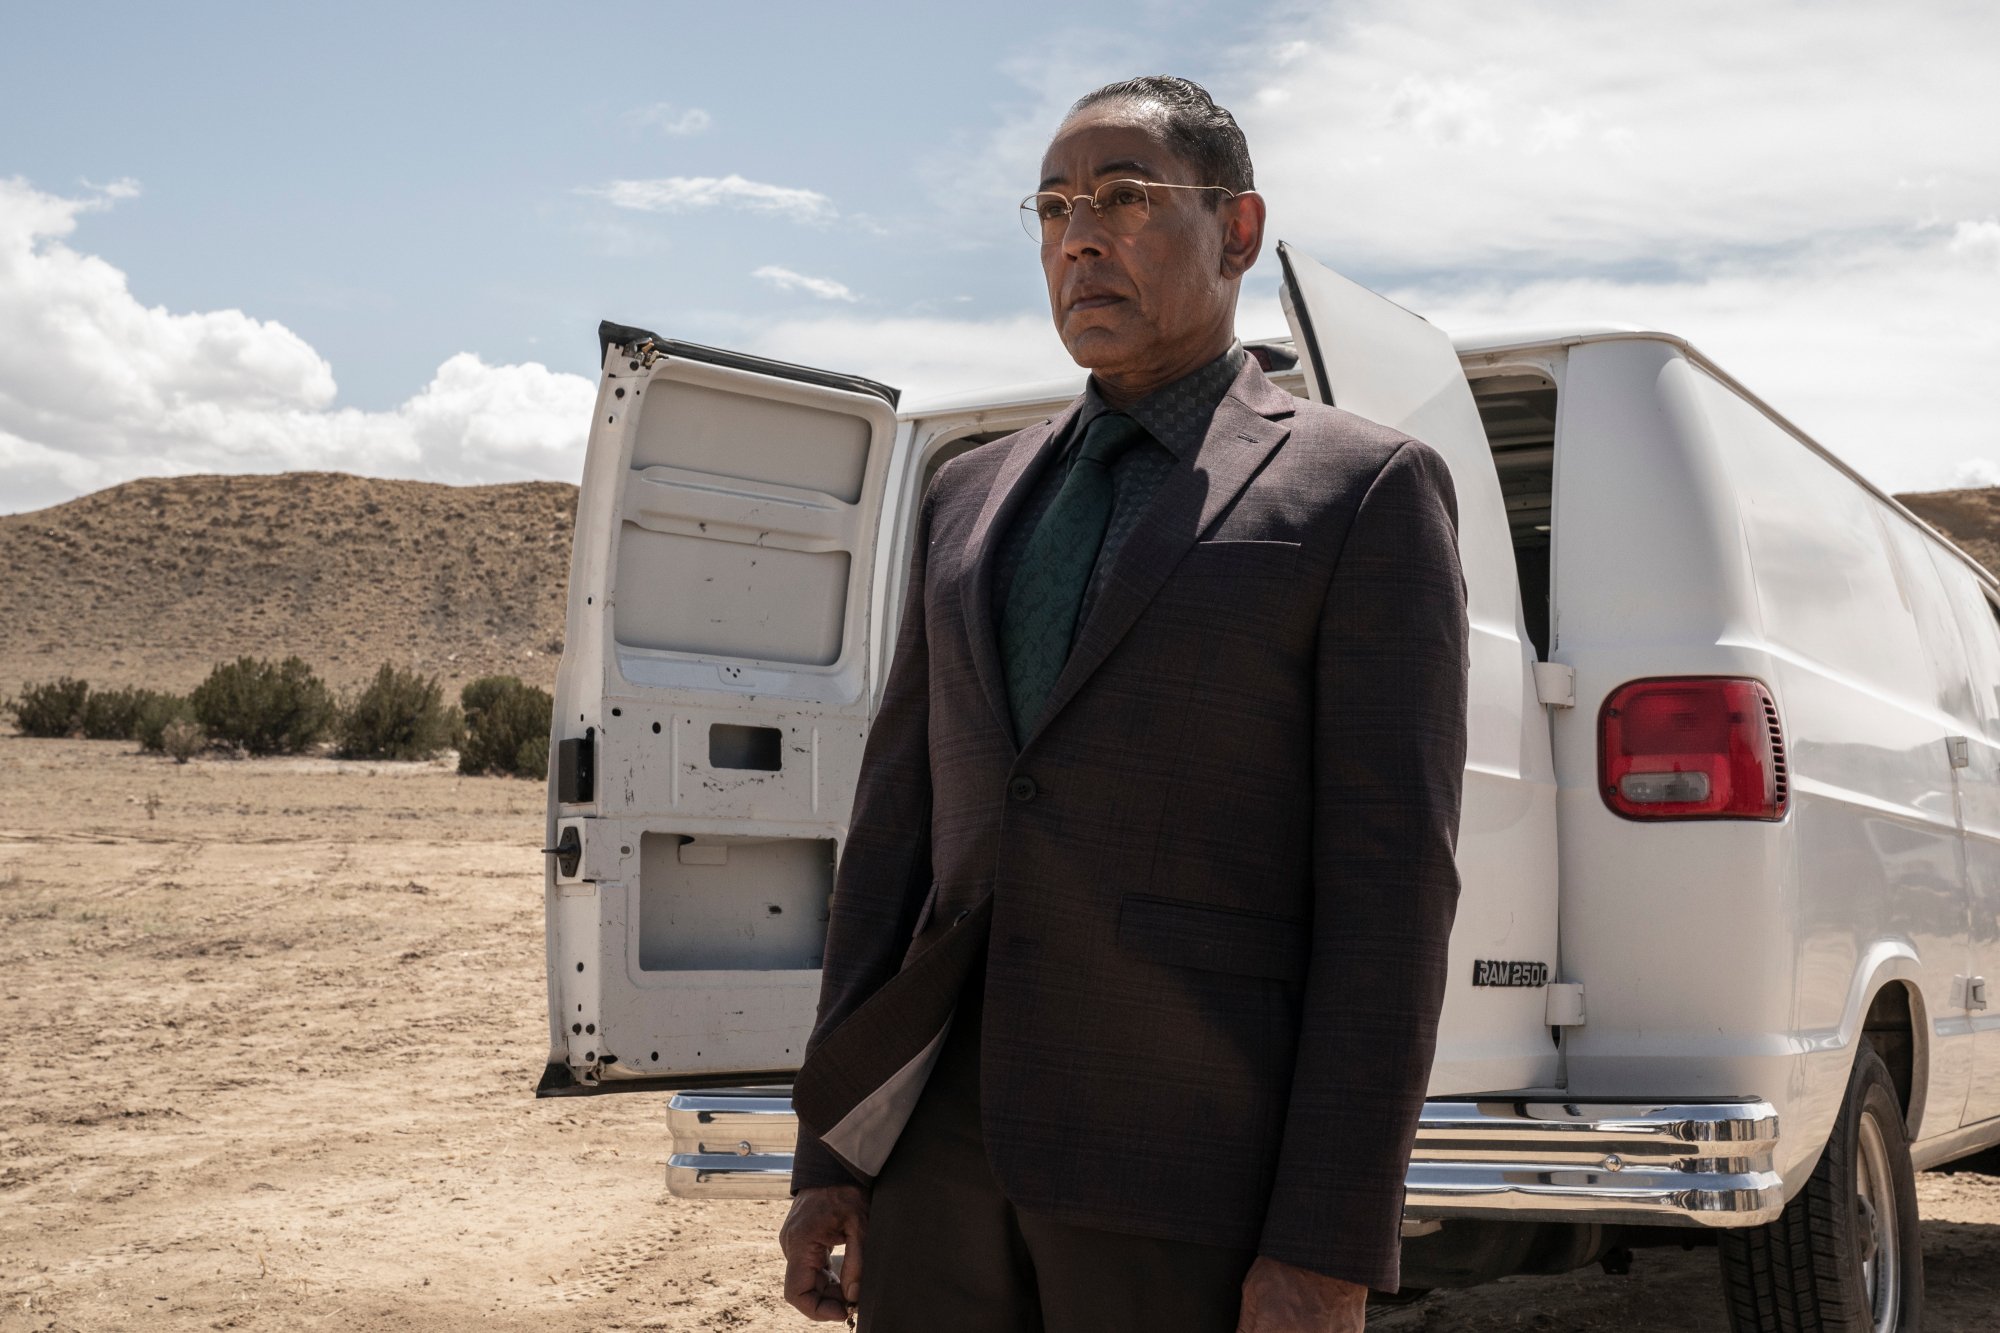 Giancarlo Esposito as Gus Fring in 'Better Call Saul' Season 6 Episode 3. He's standing in the desert in front of a white van.